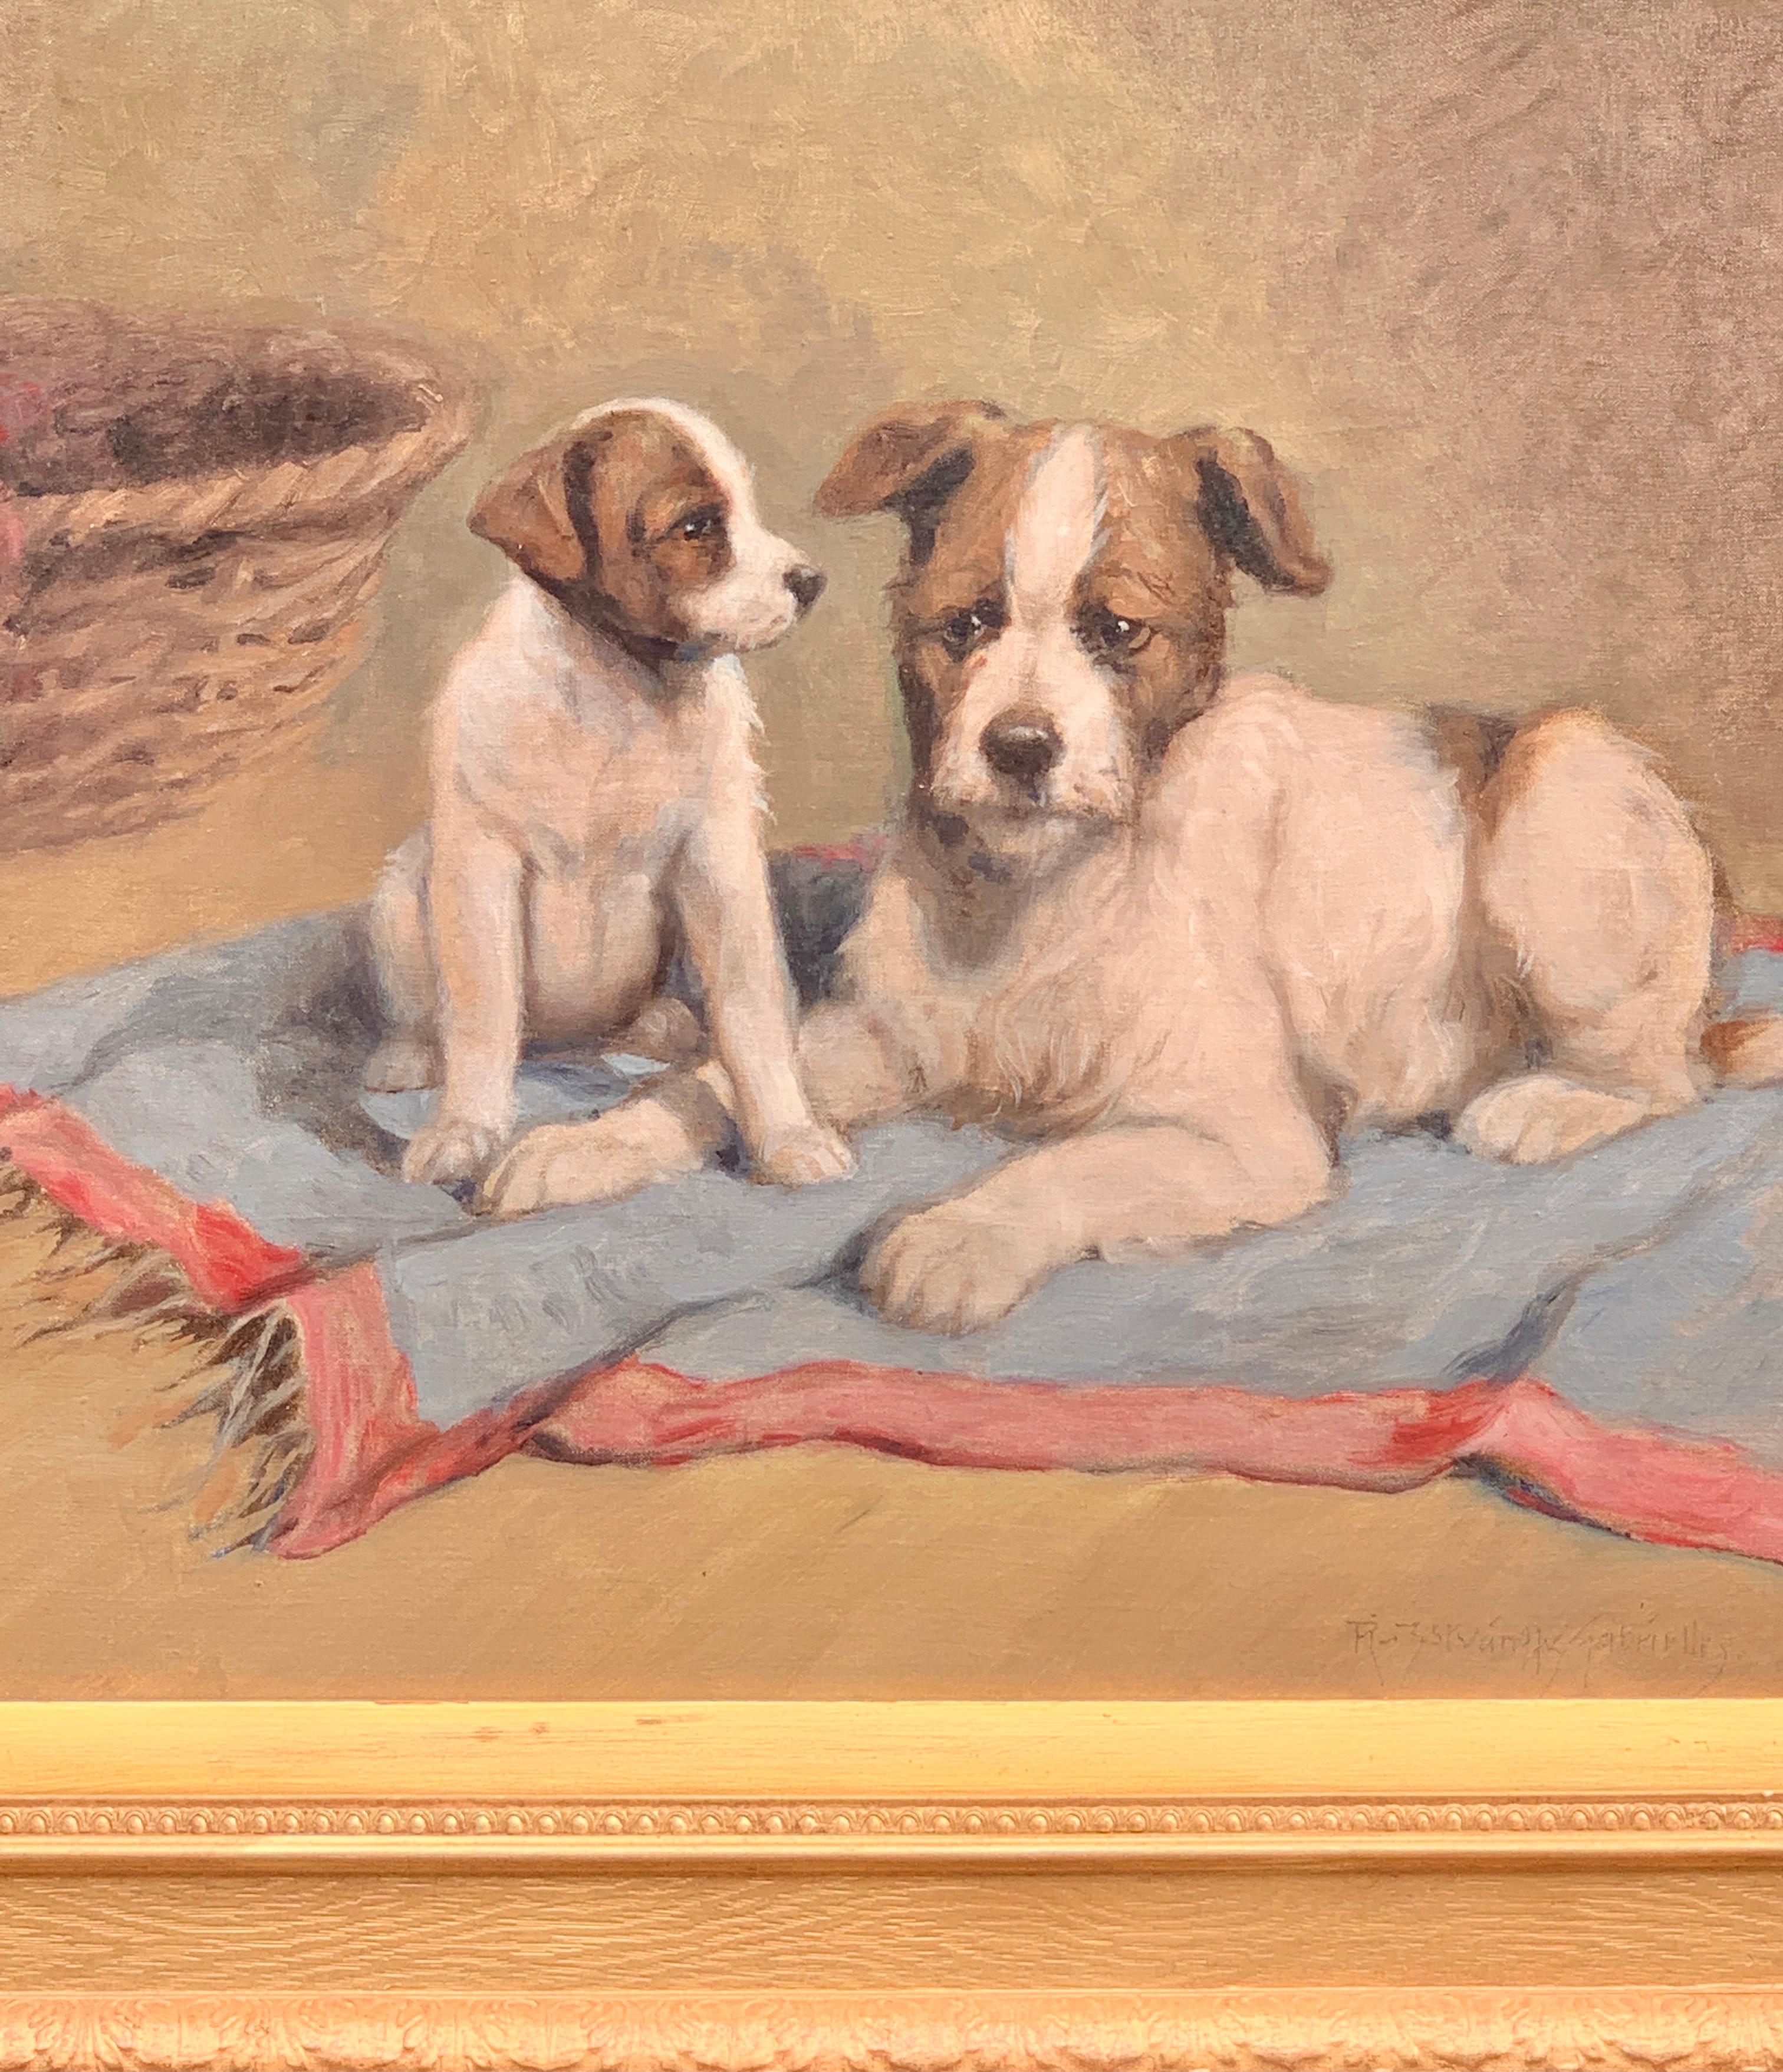 Early 20th century Hungarian portrait of a terrier dog and her puppy in oils - Painting by Gabrielle Rainer Istvanffy